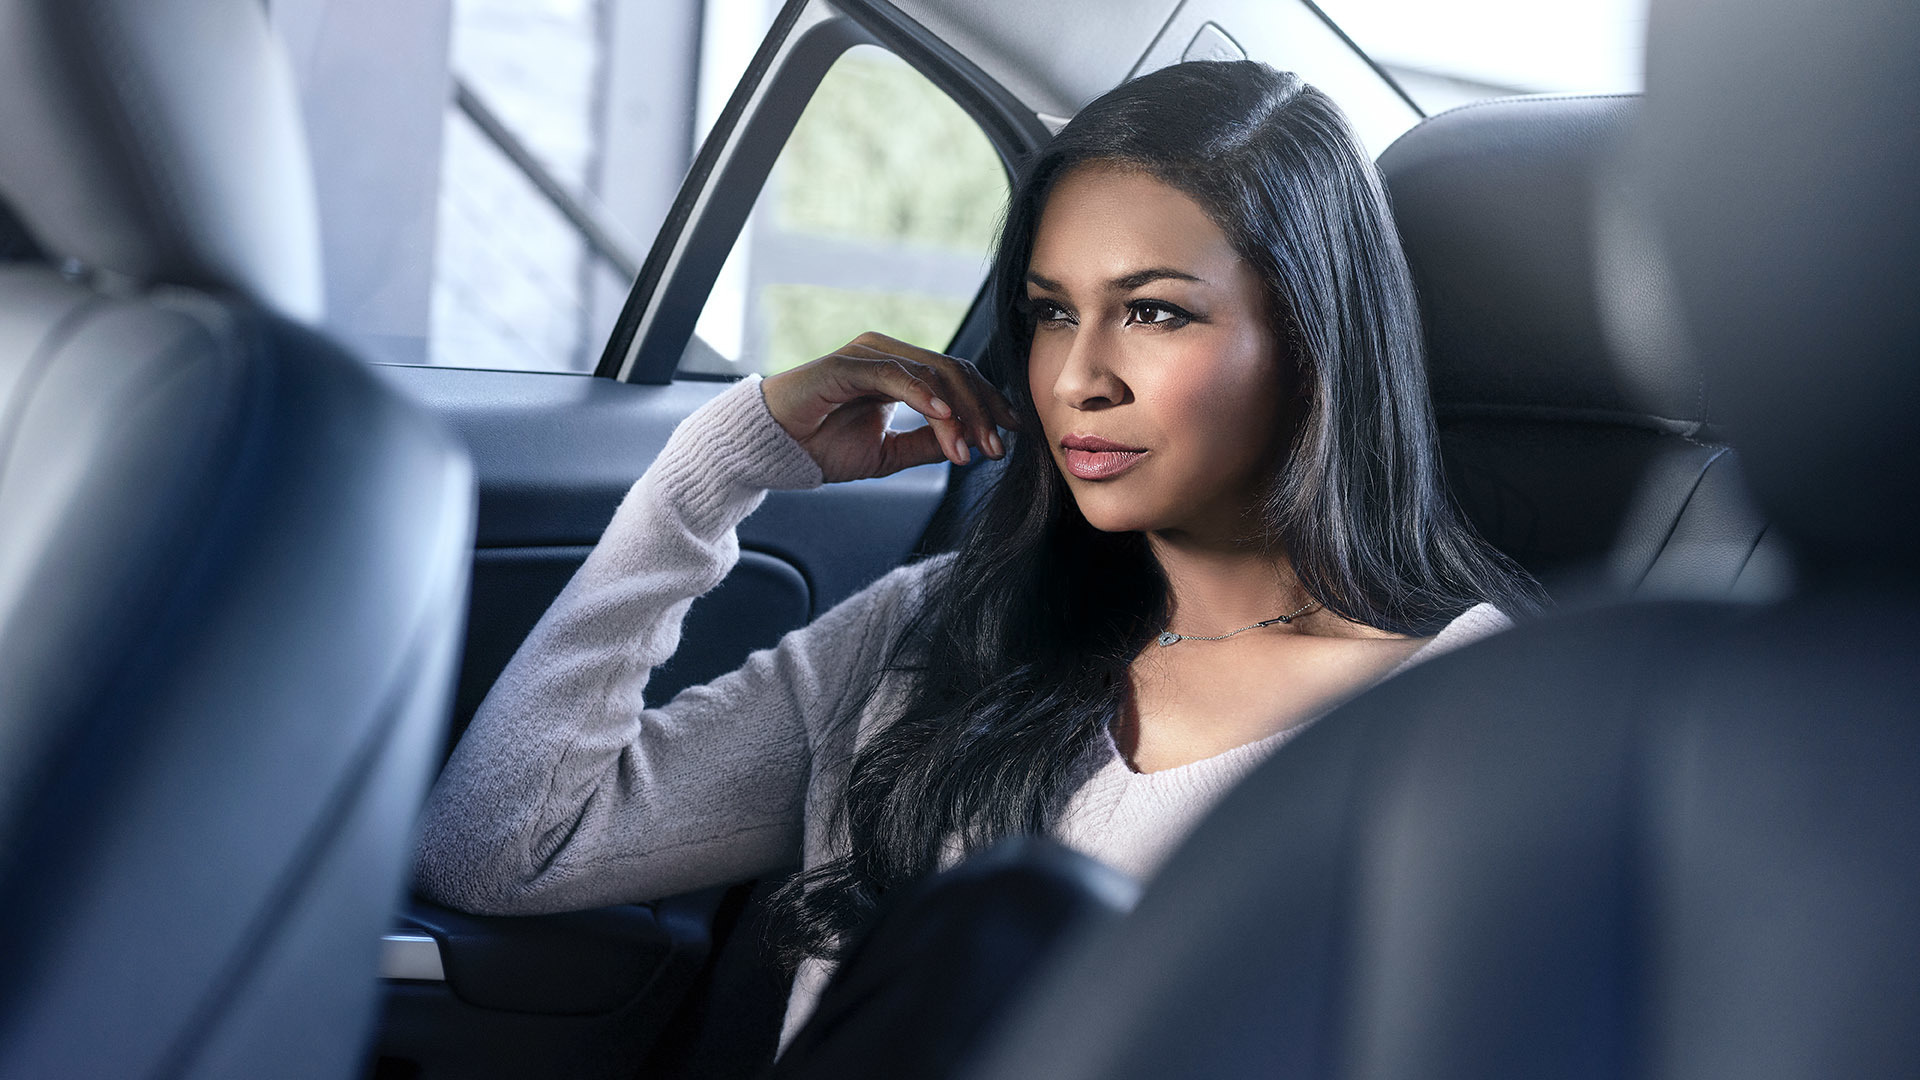 Woman on backseat of car looking along